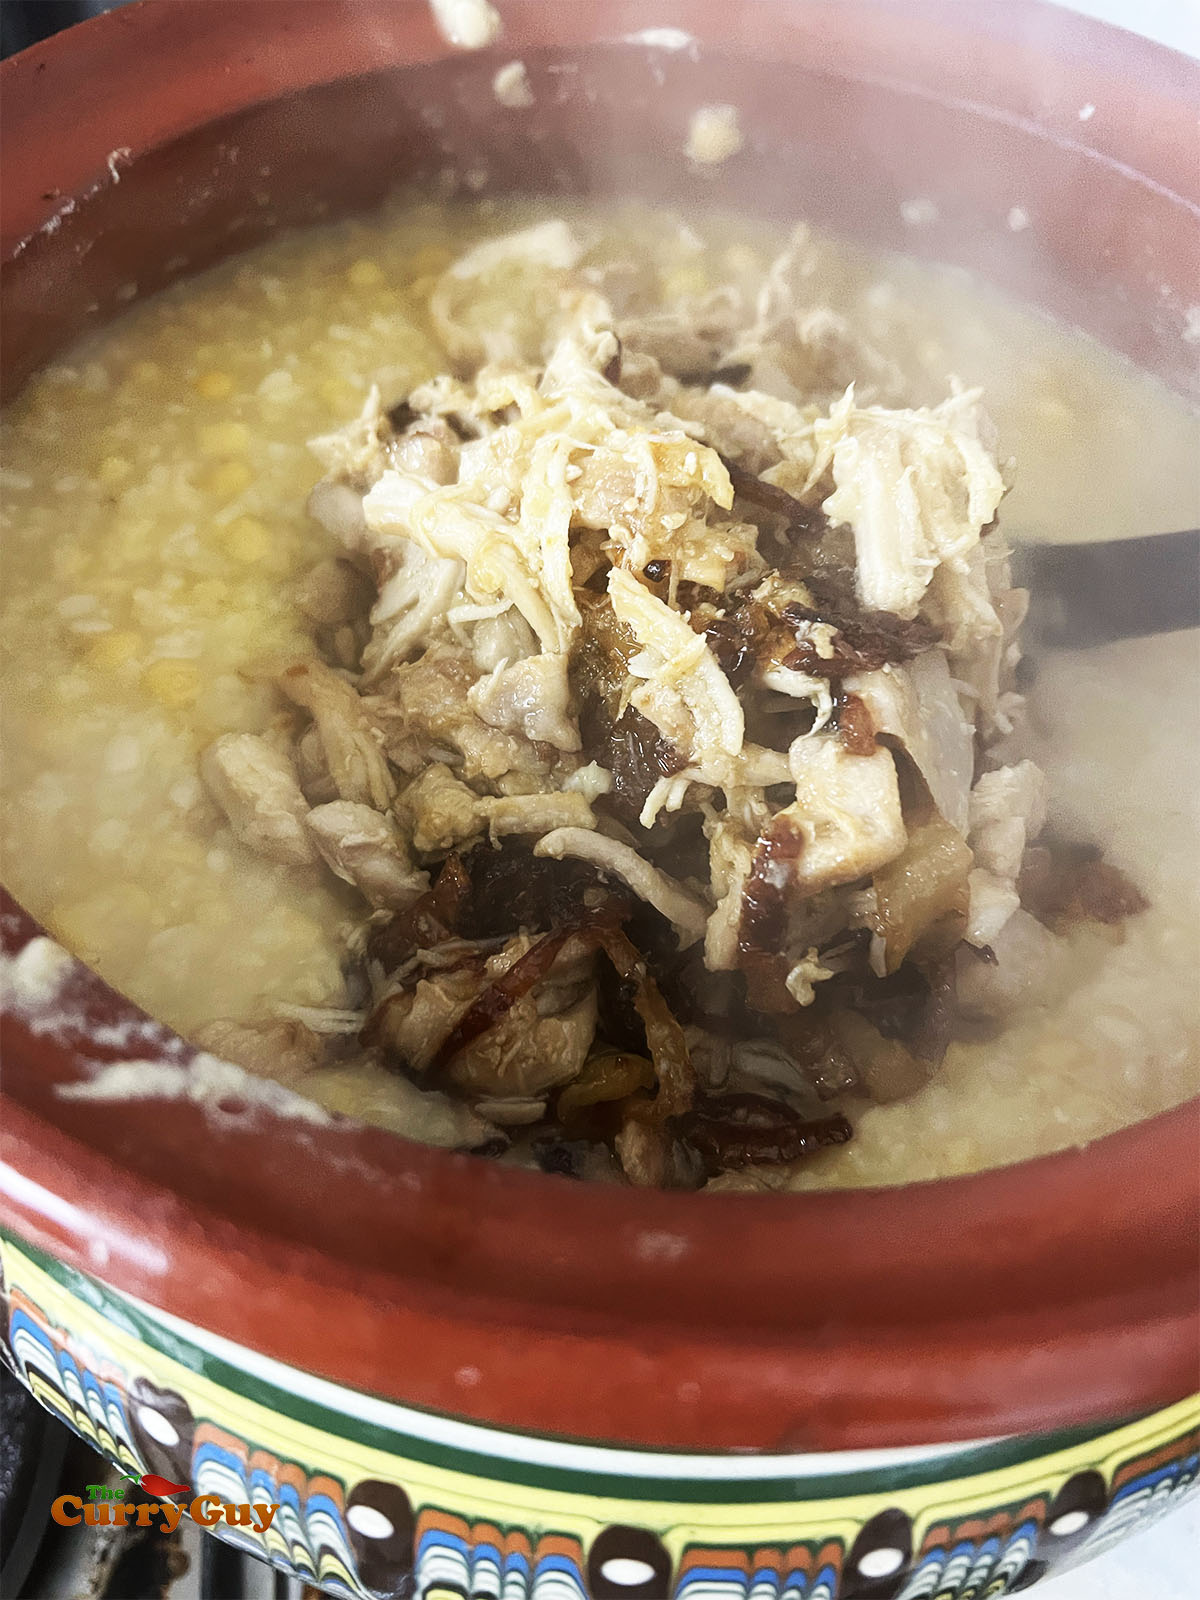 Adding the shredded chicken, fried onions and ghee to the pot.